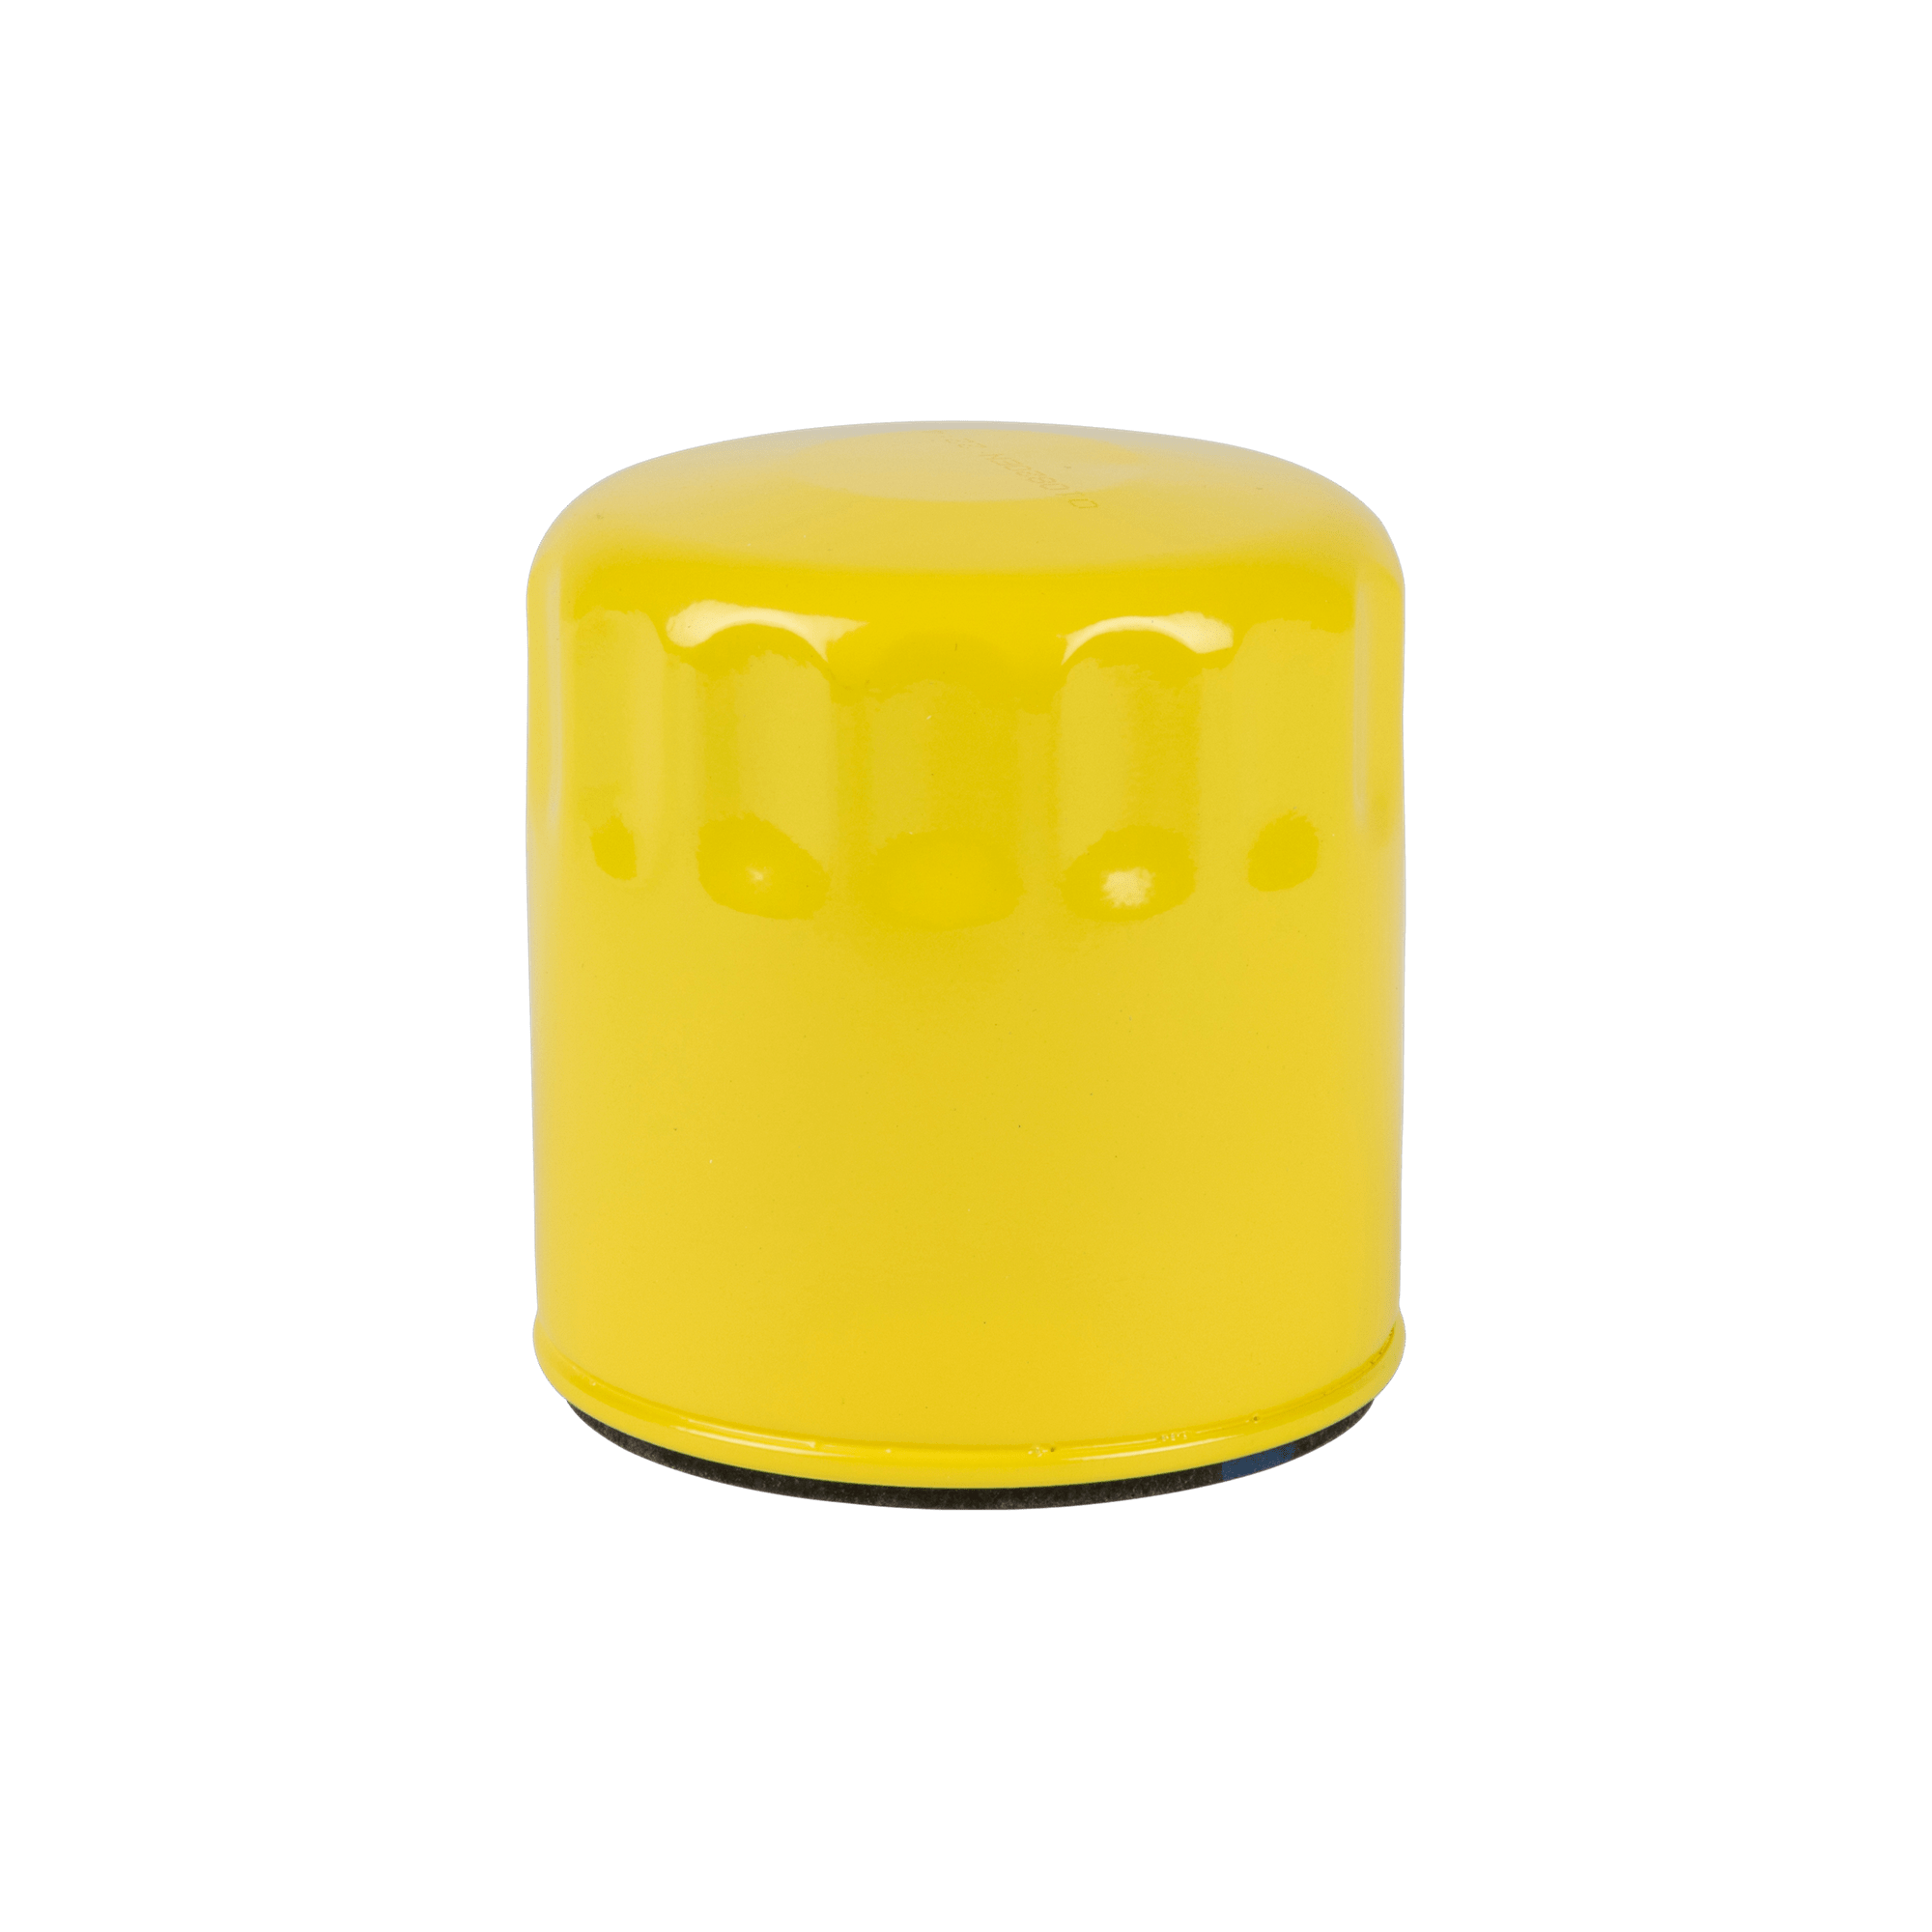 Image for Oil filter from HusqvarnaB2C